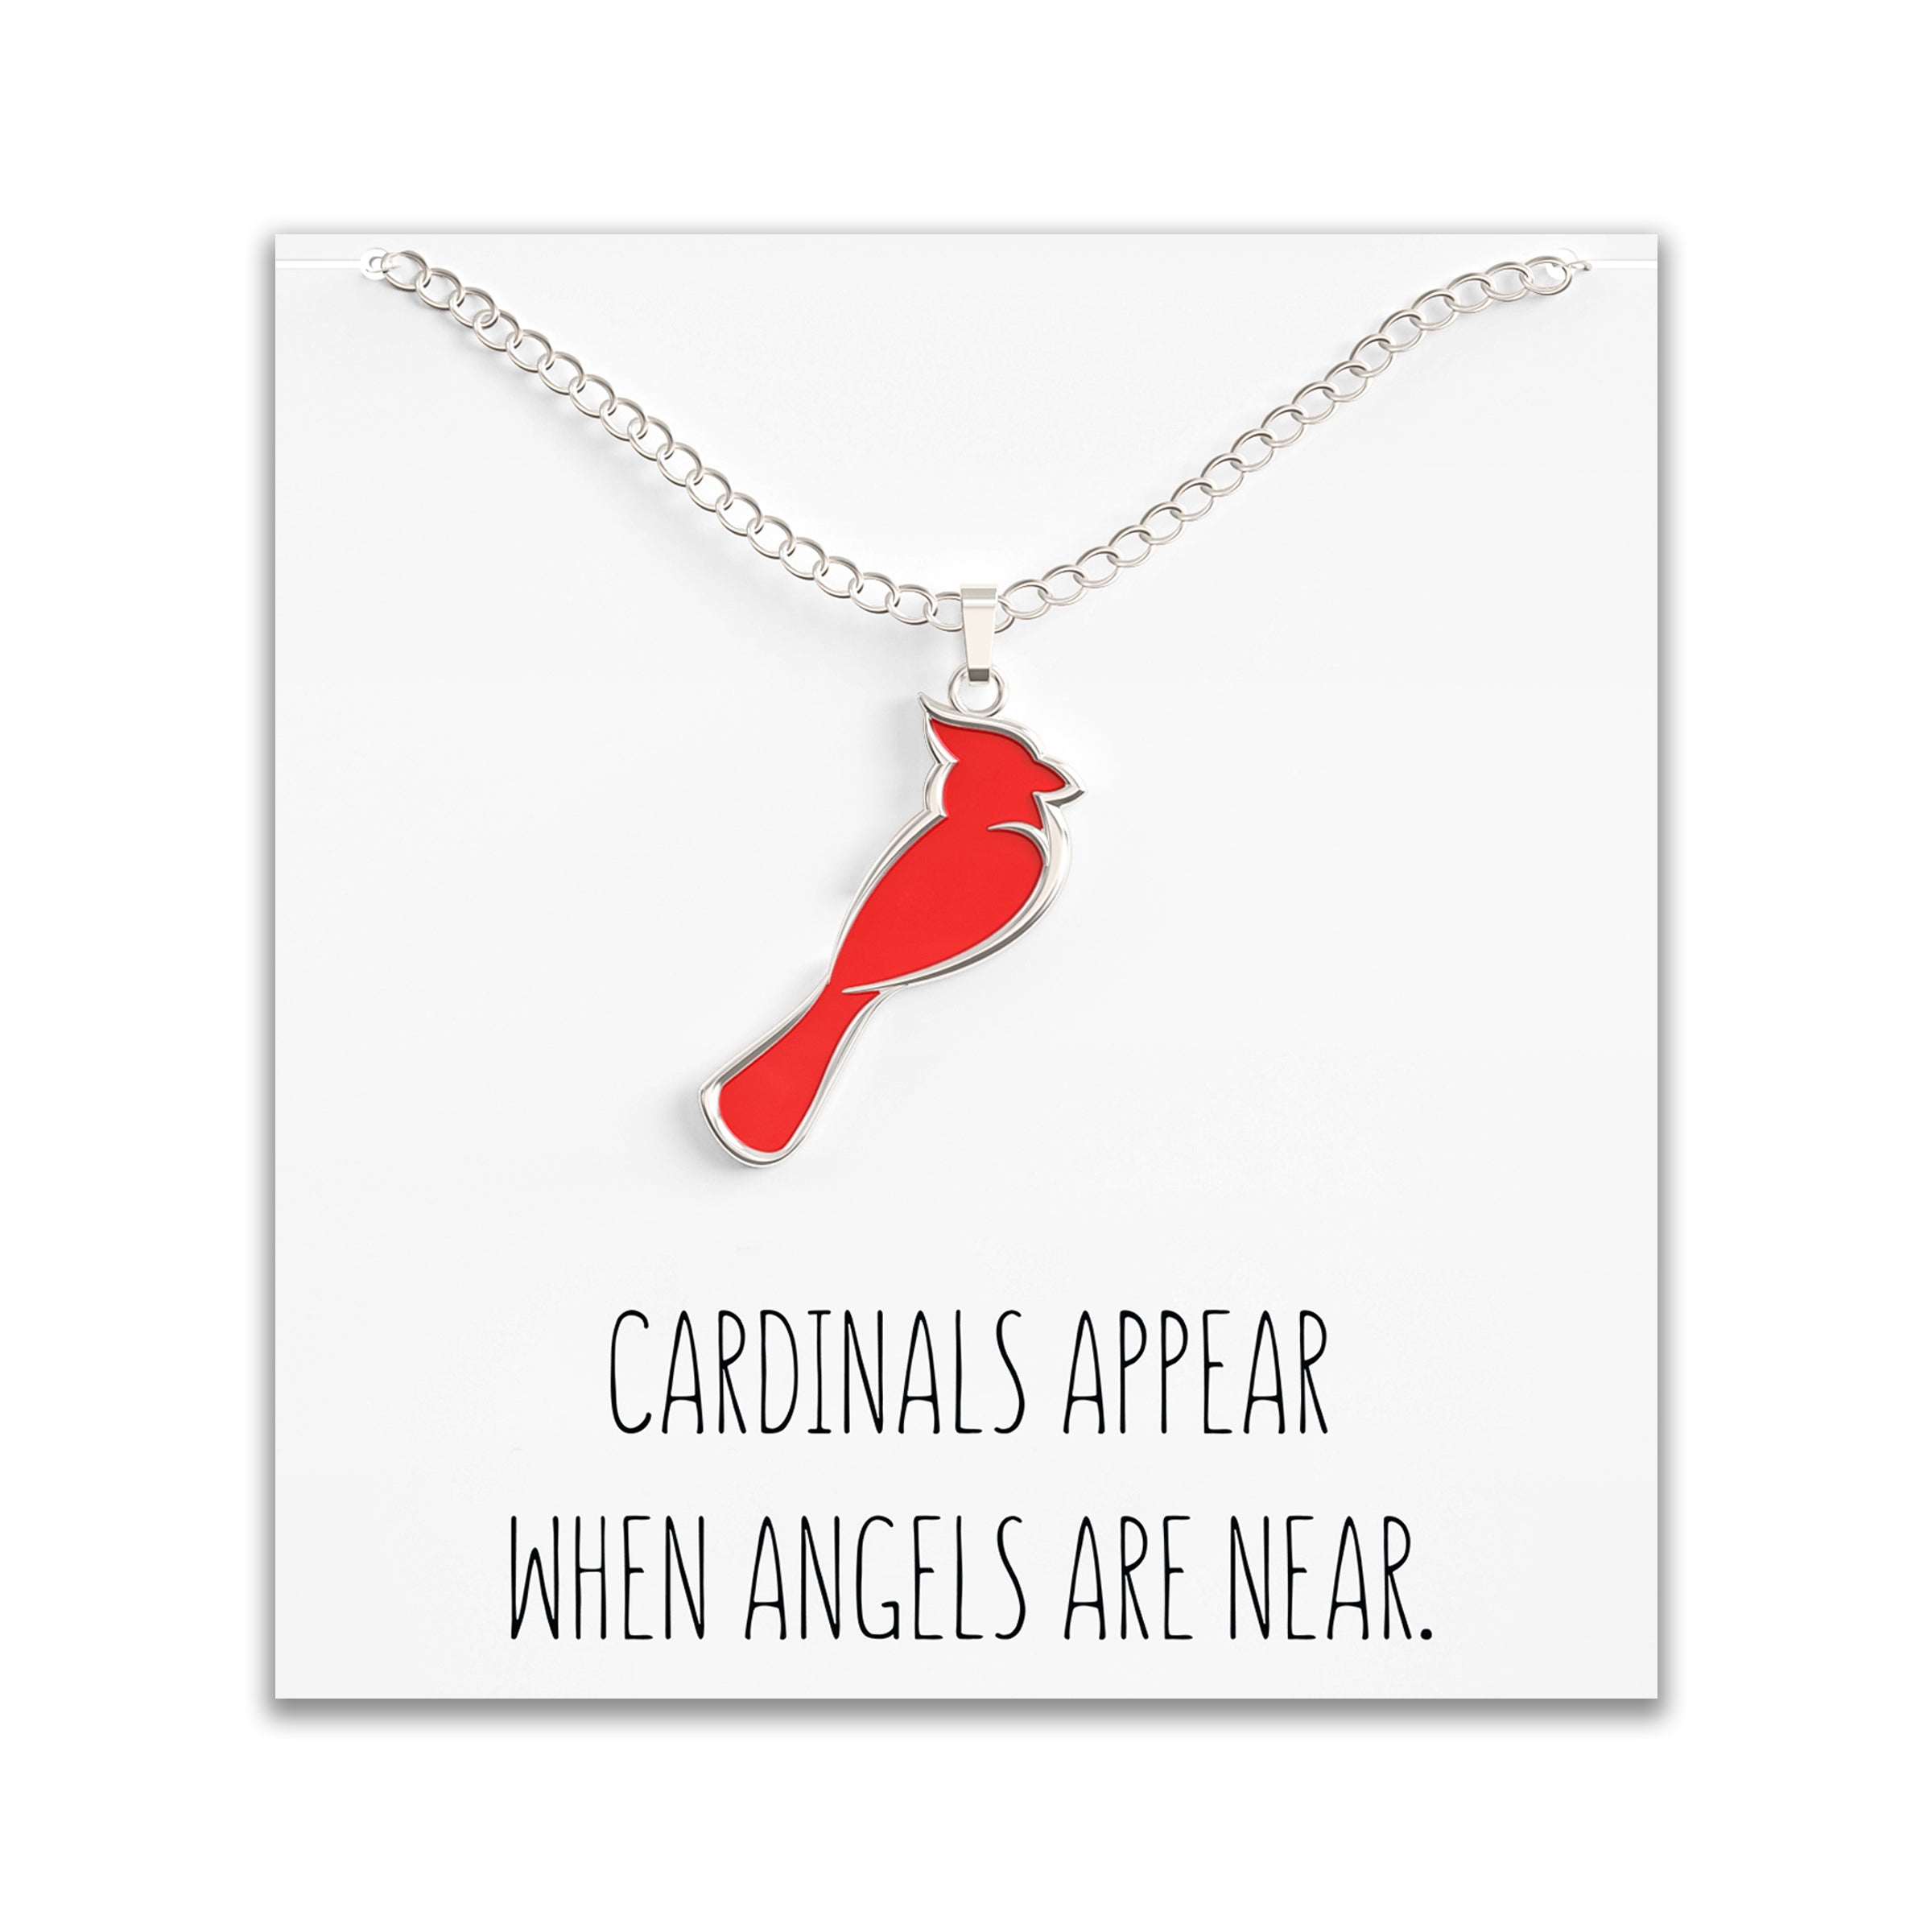 Memorial Cardinal Charm Photo Necklace- Cardinals Appear When Angels Are Near